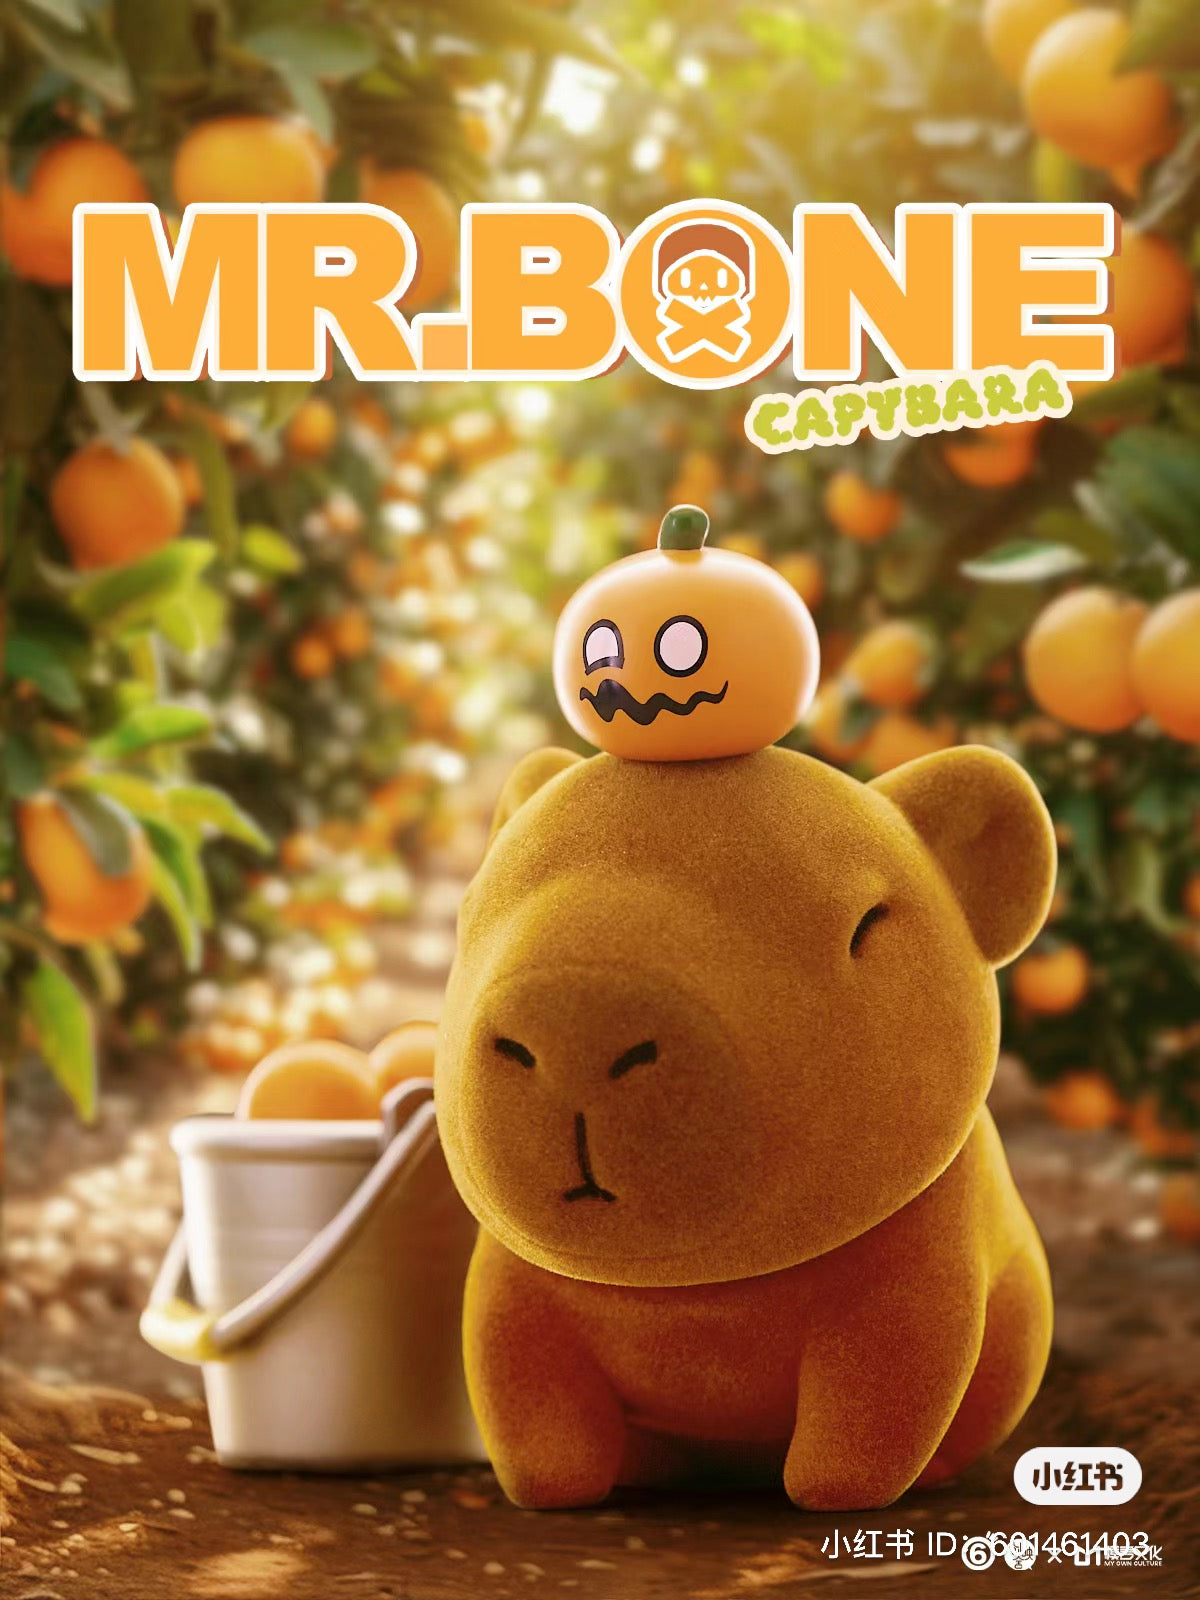 A blind box preorder for Mr Bone Capybaras, a 12CM PVC/ABS/Vinyl figure featuring a smiling stuffed animal with a pumpkin on its head. Includes Dog.